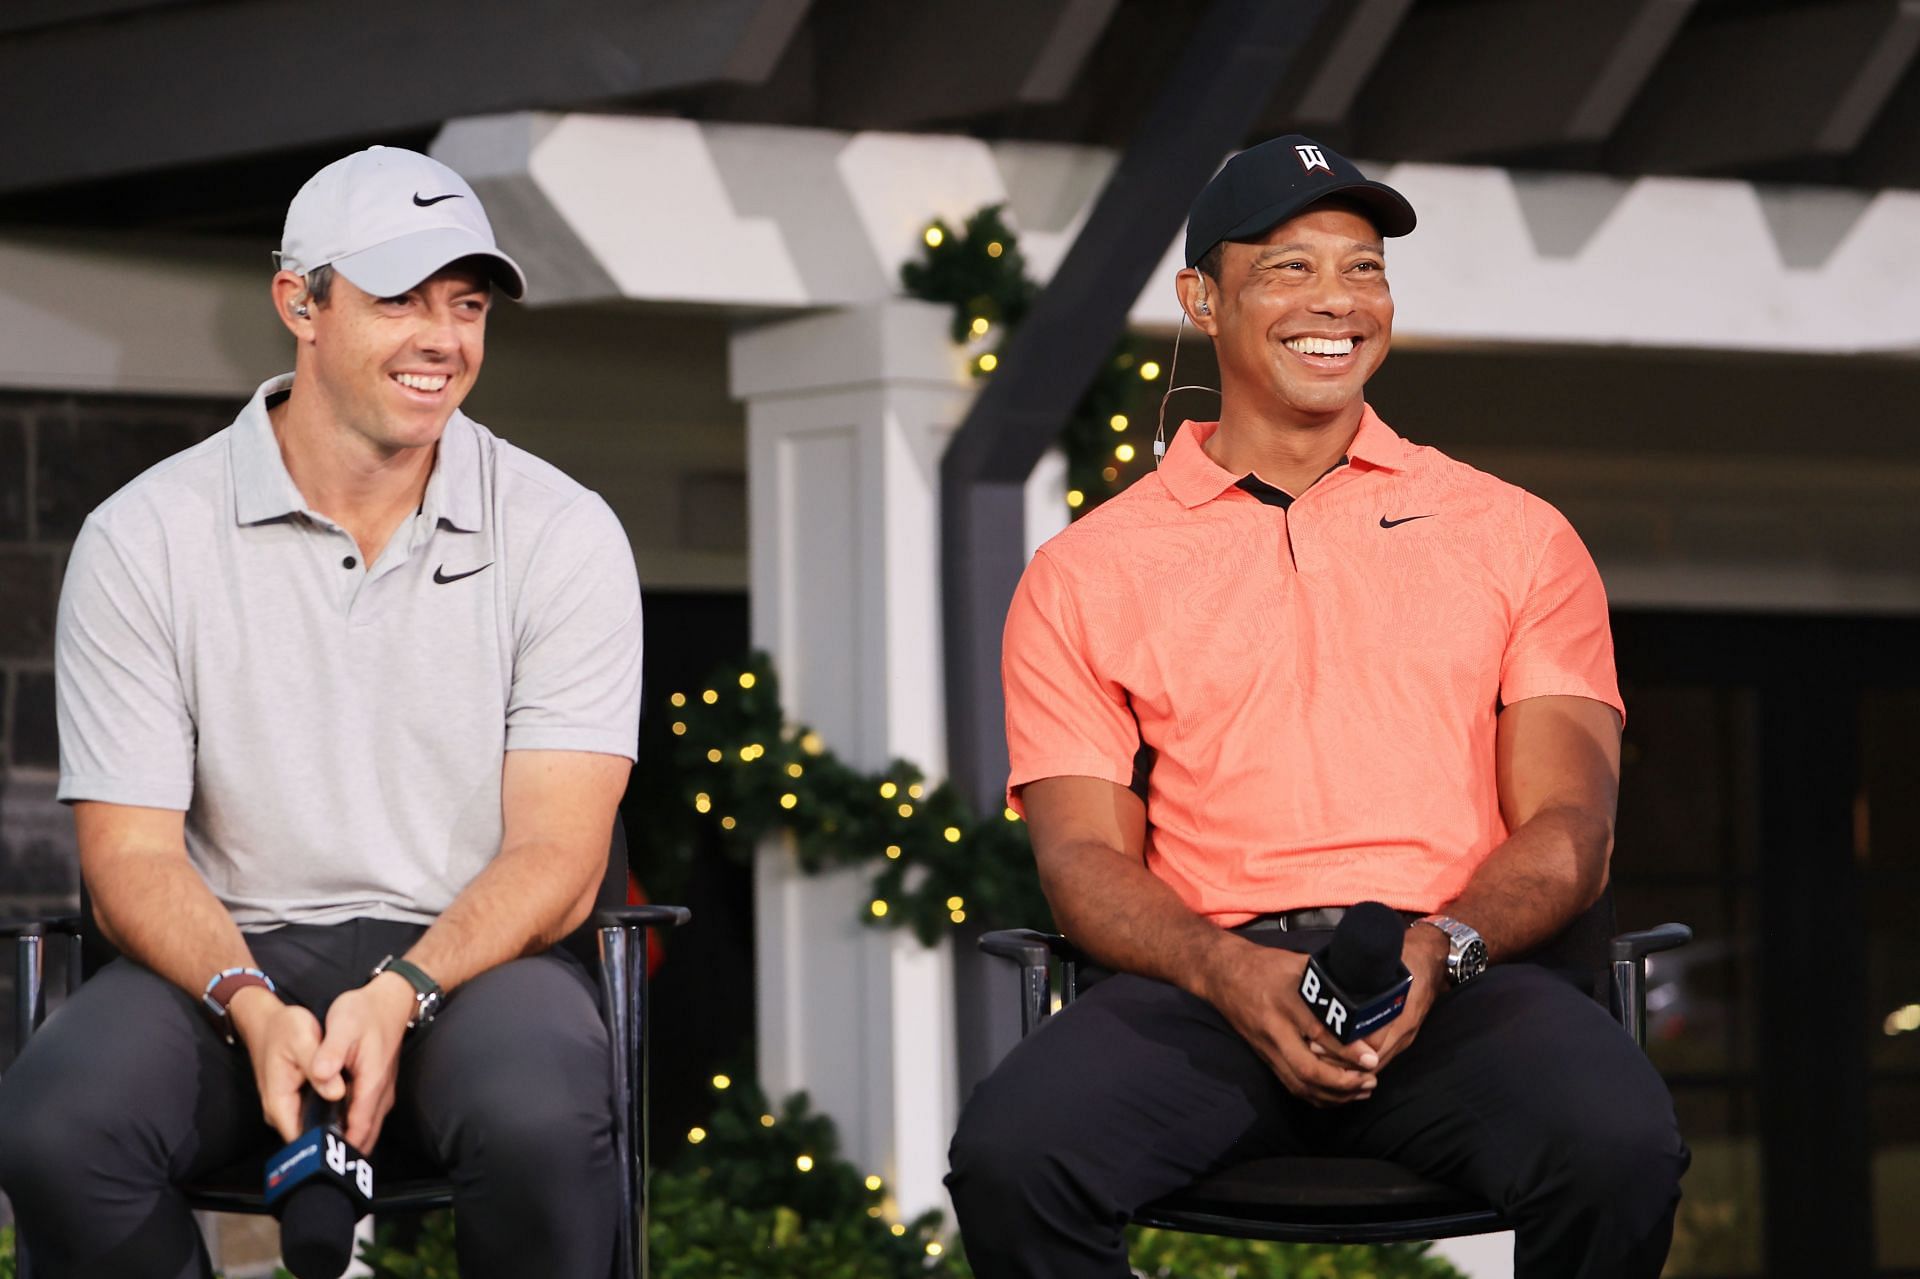 Tiger Woods and Rory McIlroy invited golfers to TGL